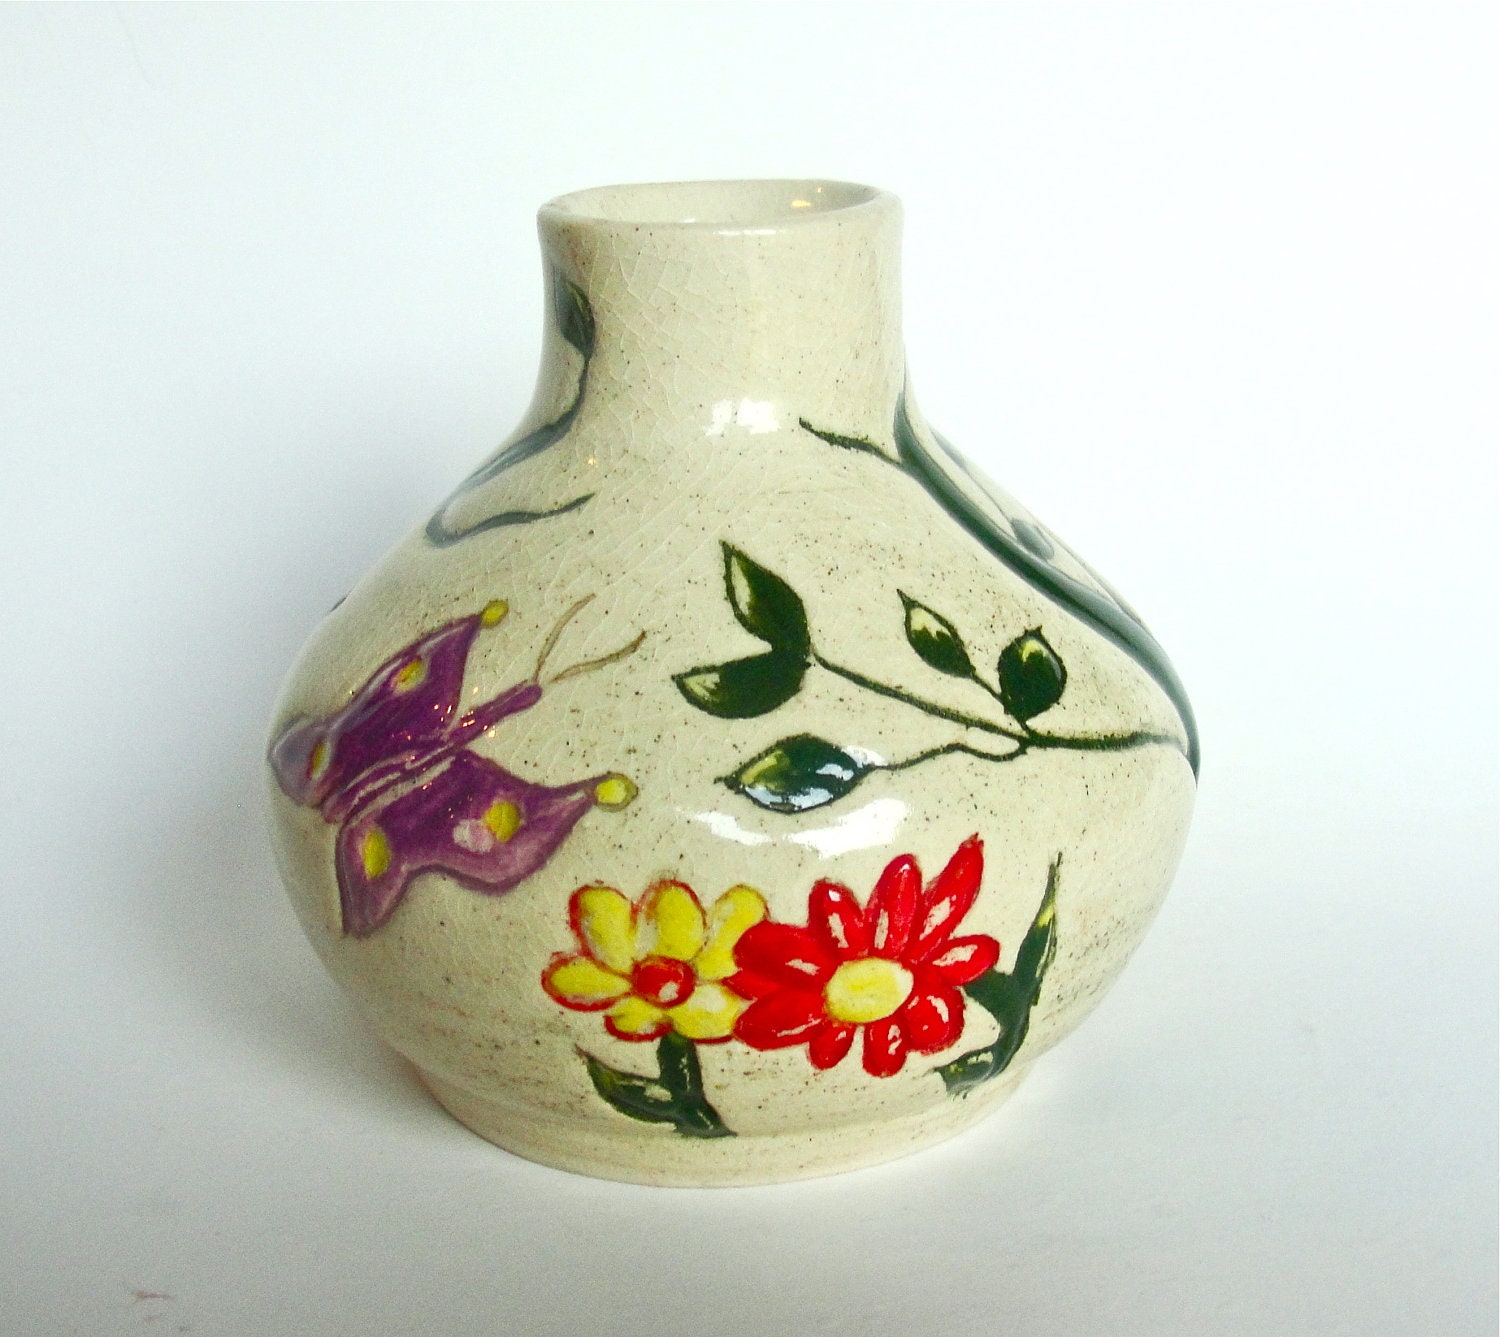 Bud vase, Butterfly,Bird,Flowers,Trees,Ceramic Stoneware,Hand Carved,One of a Kind,Wedding Gift,Bridal Gift,Housewarming Gift